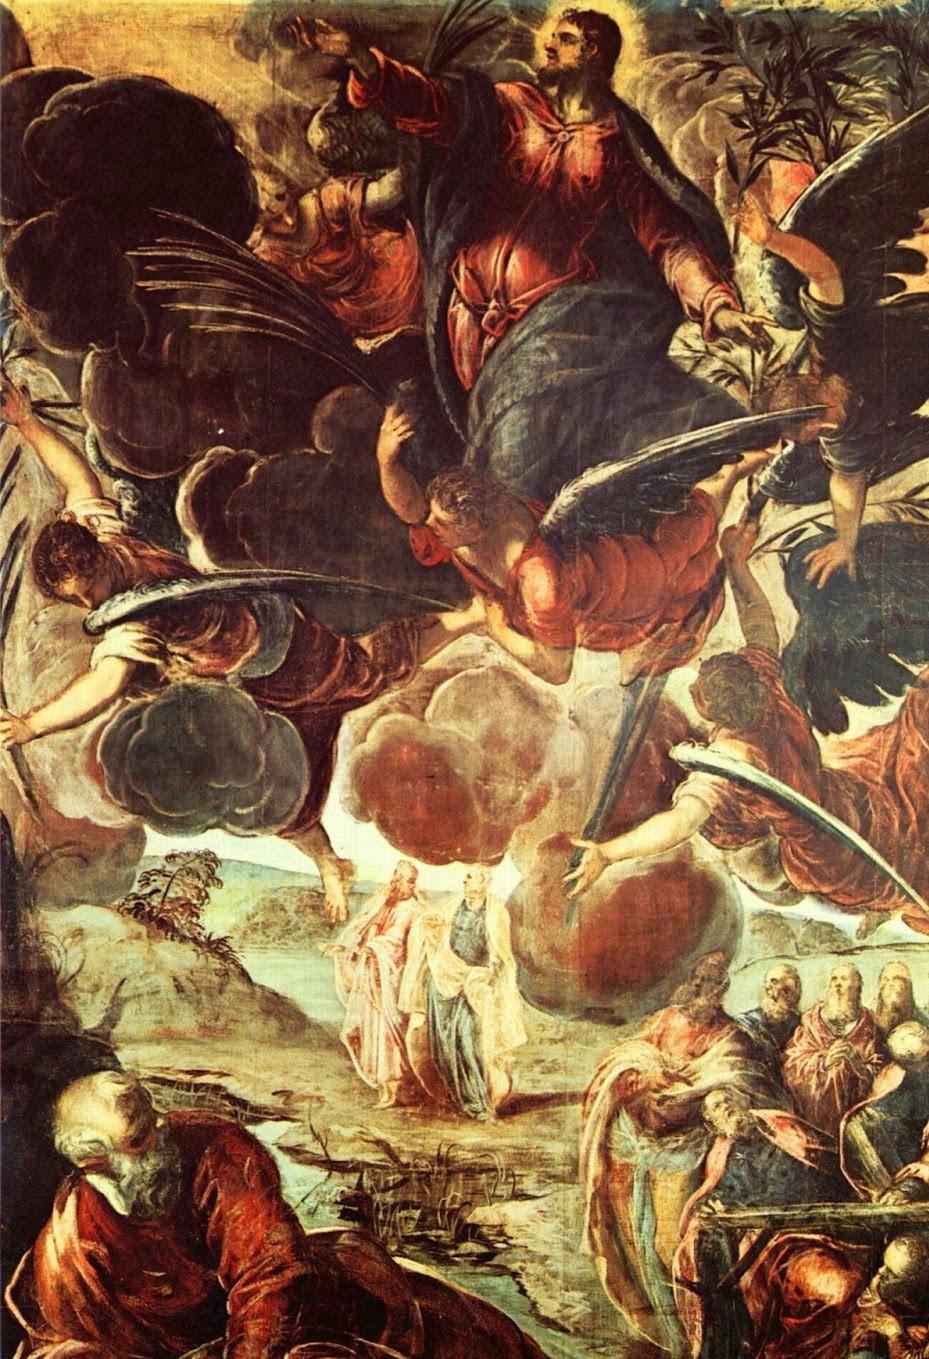 2nd Glorious mystery The Ascension and we pray for the fruit of the mystery Hope 1. Jesus led His disciples out near Bethany, and with hand upraised, blessed them. (Lk. 24:50) - Hail 2.